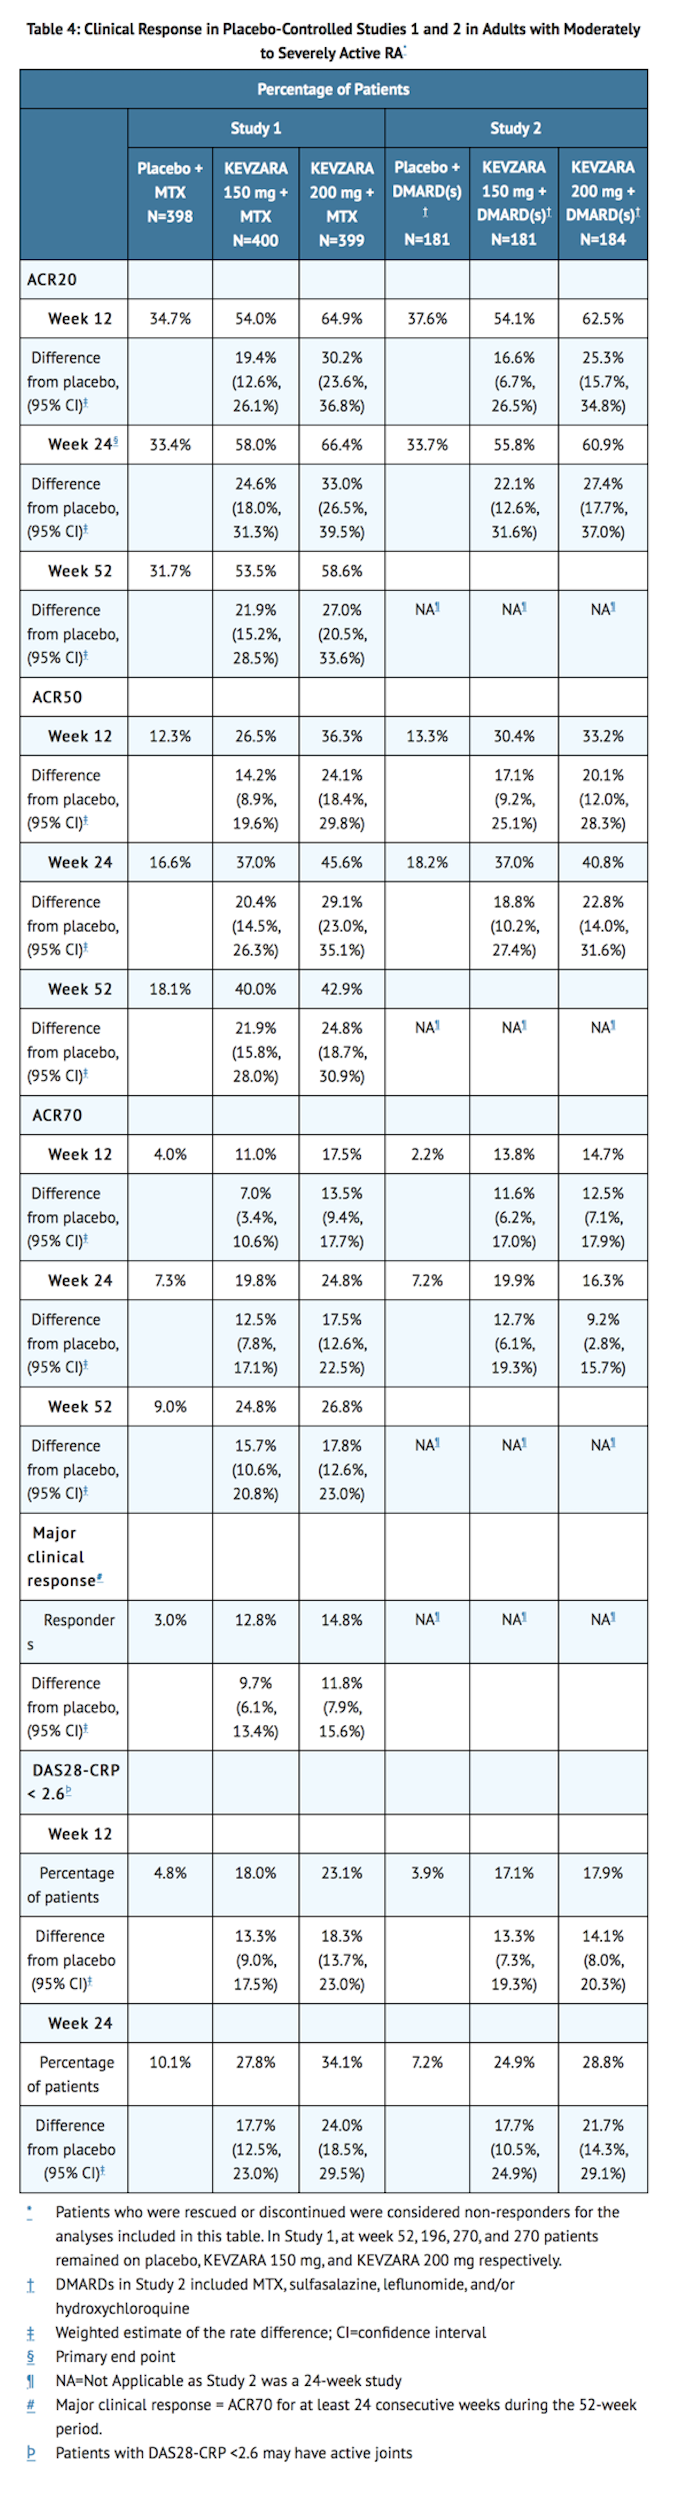 File:Sarilumab Clinical Studies Table 1.png